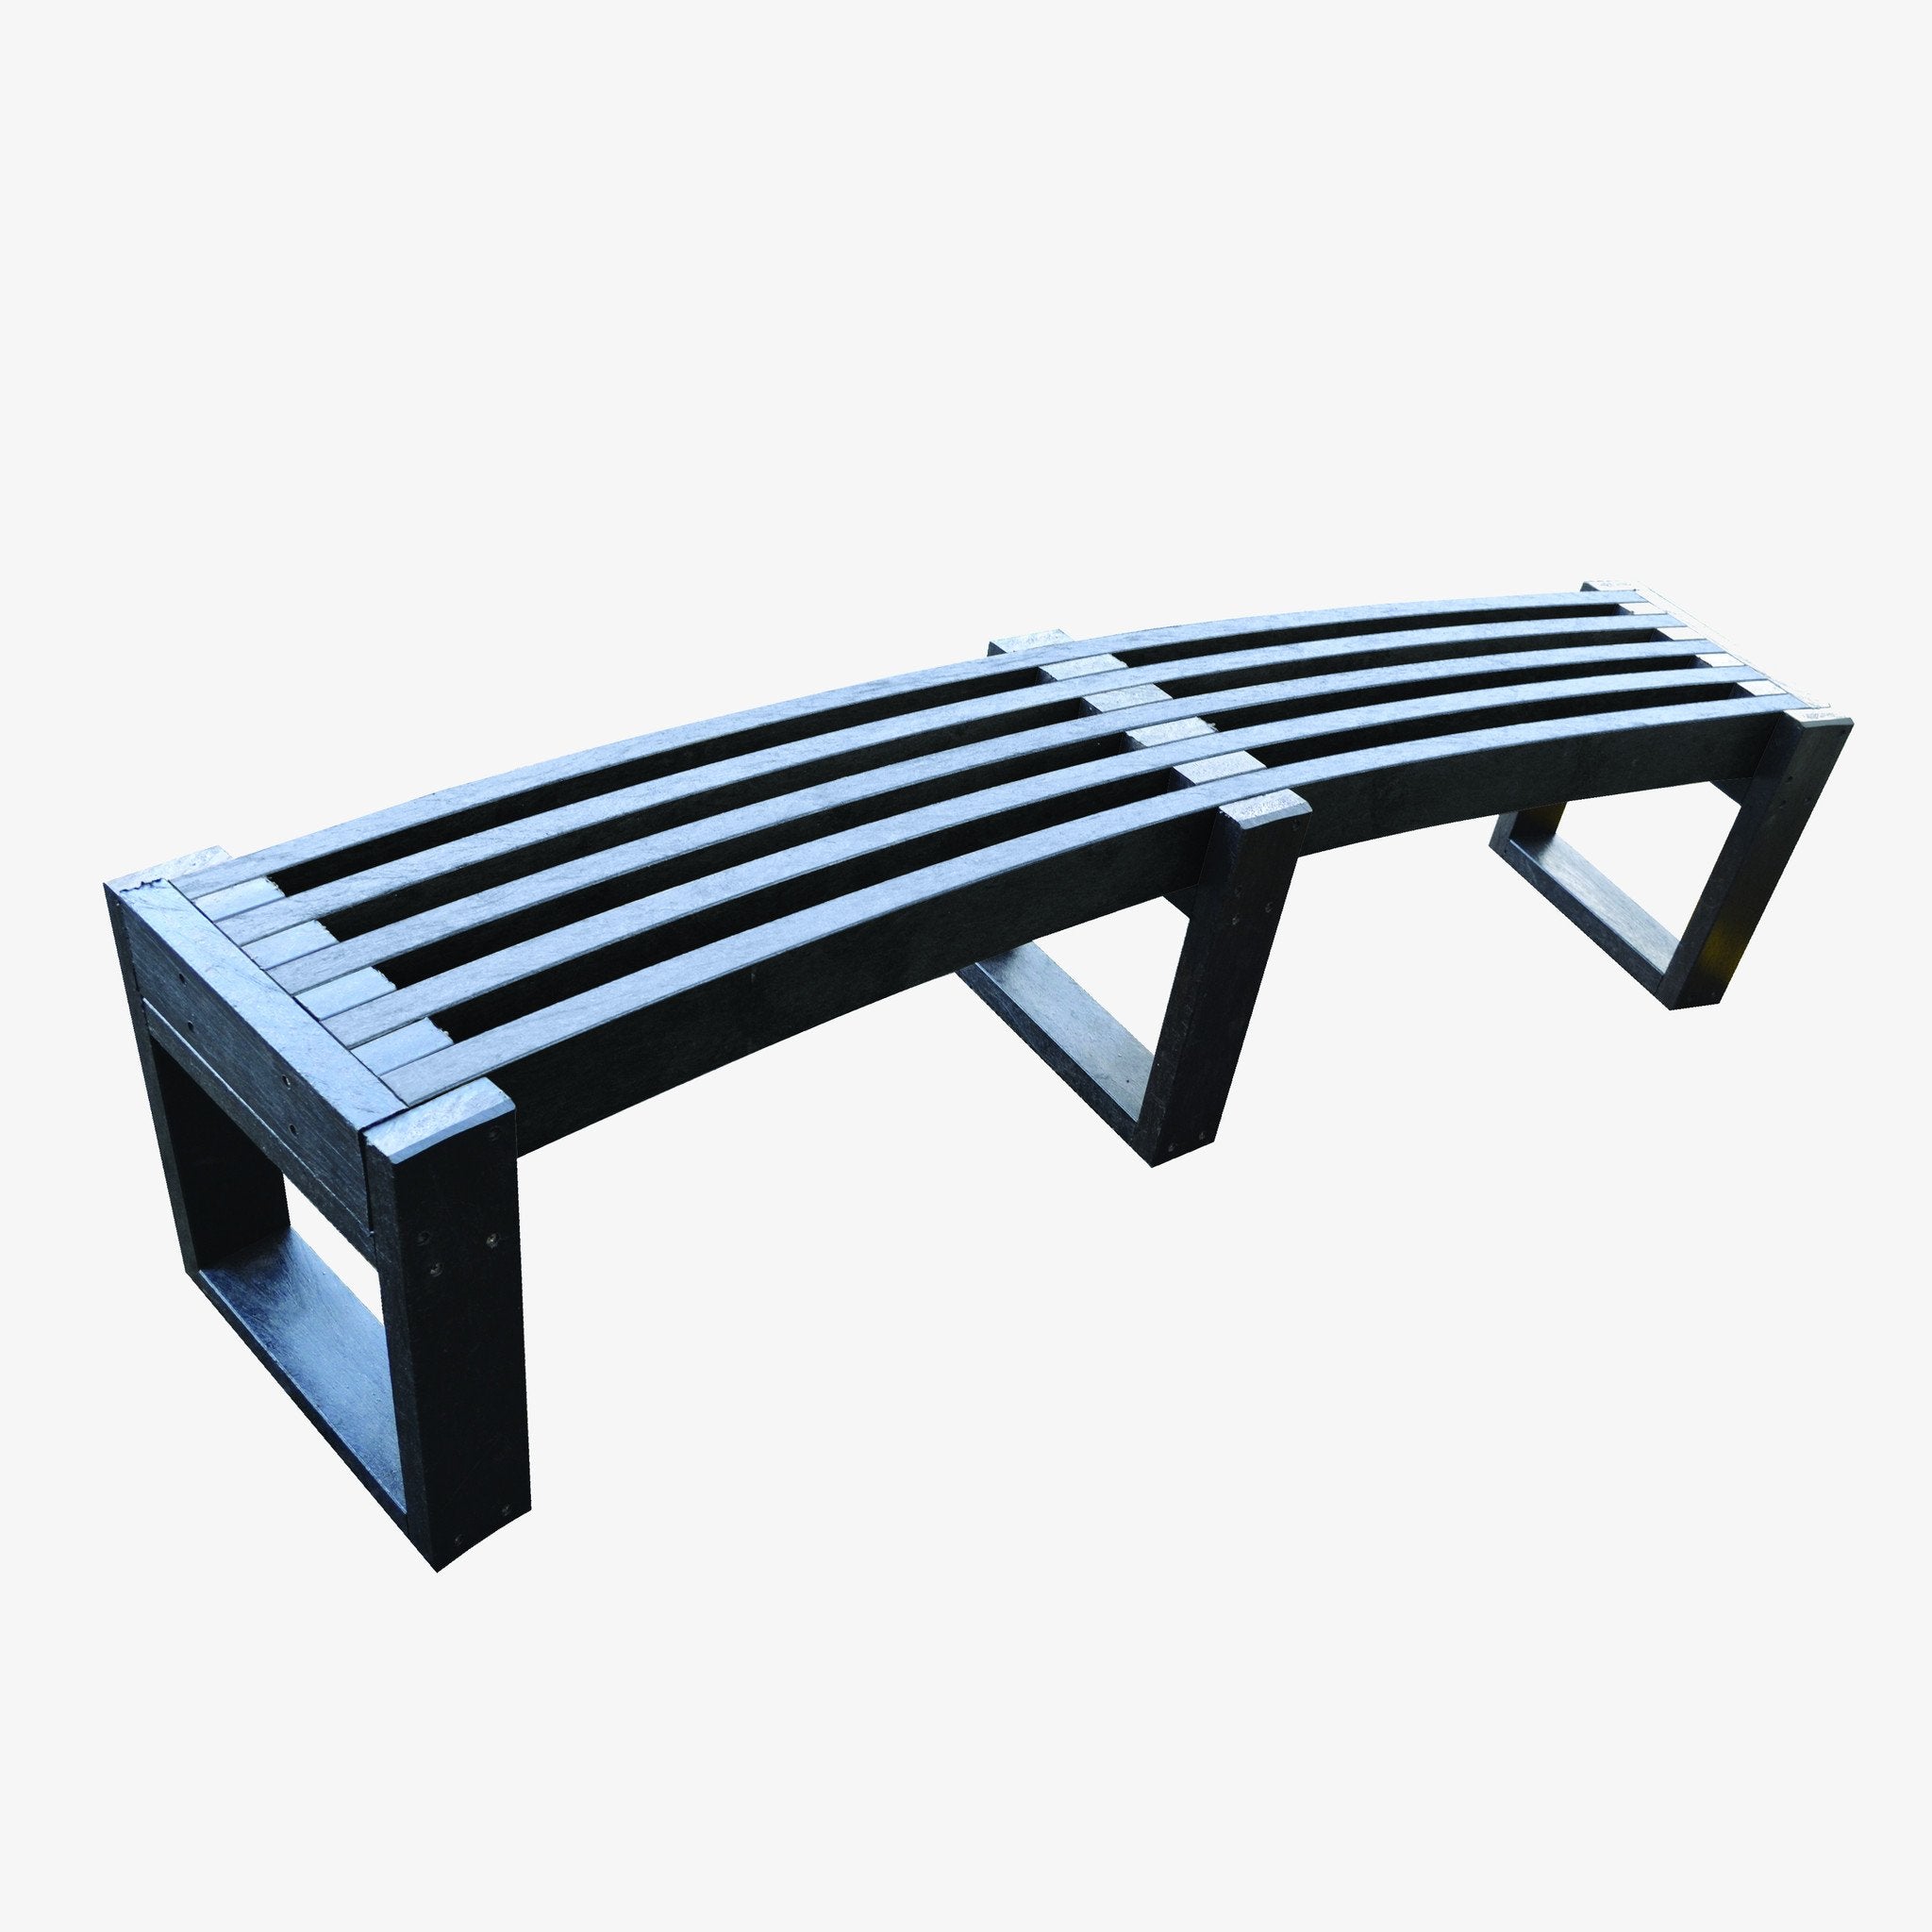 Manticore Lumber curved black recycled plastic bench